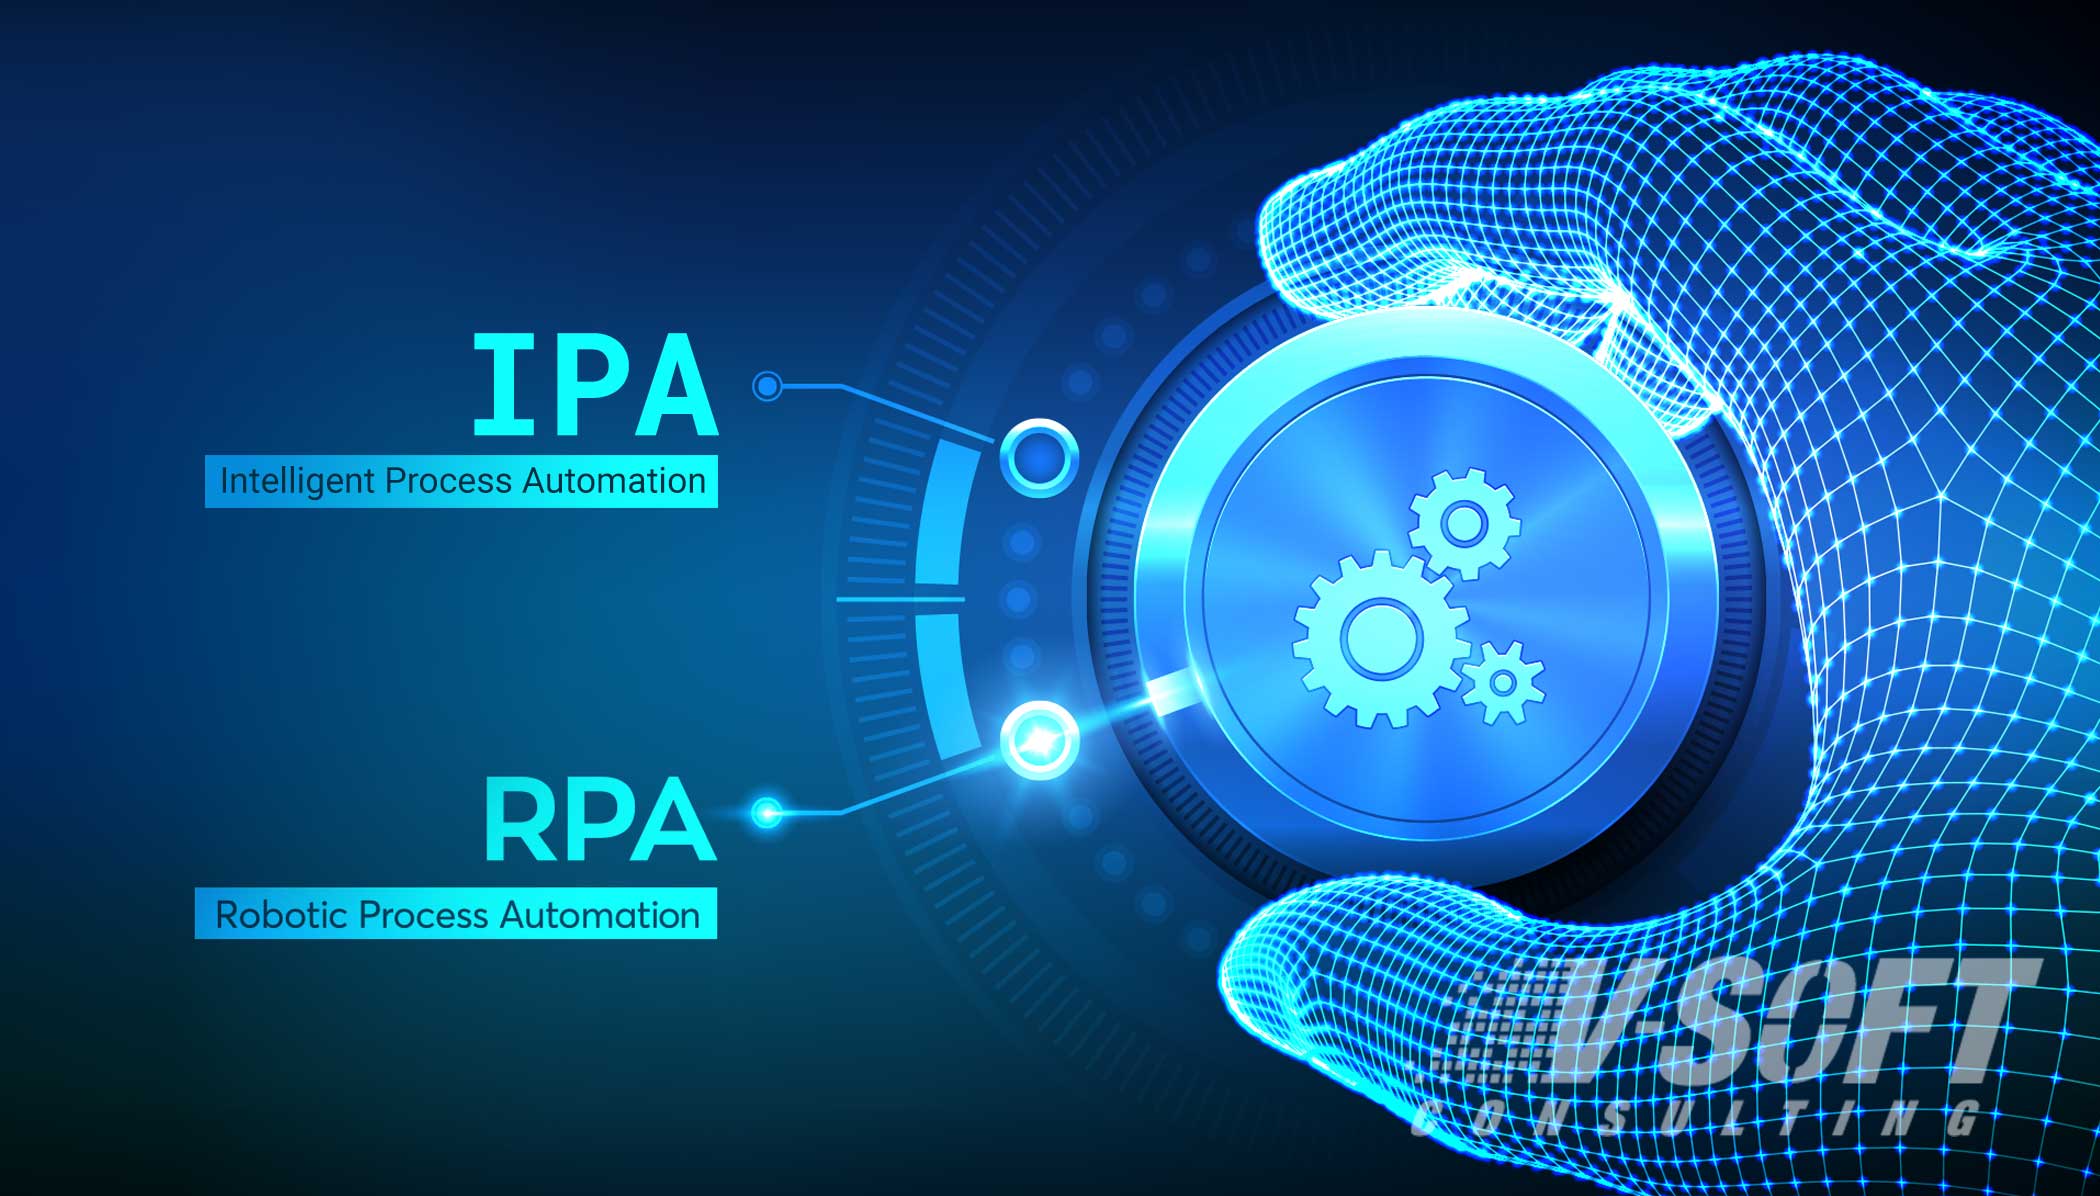 What's the difference between IPA and RPA?